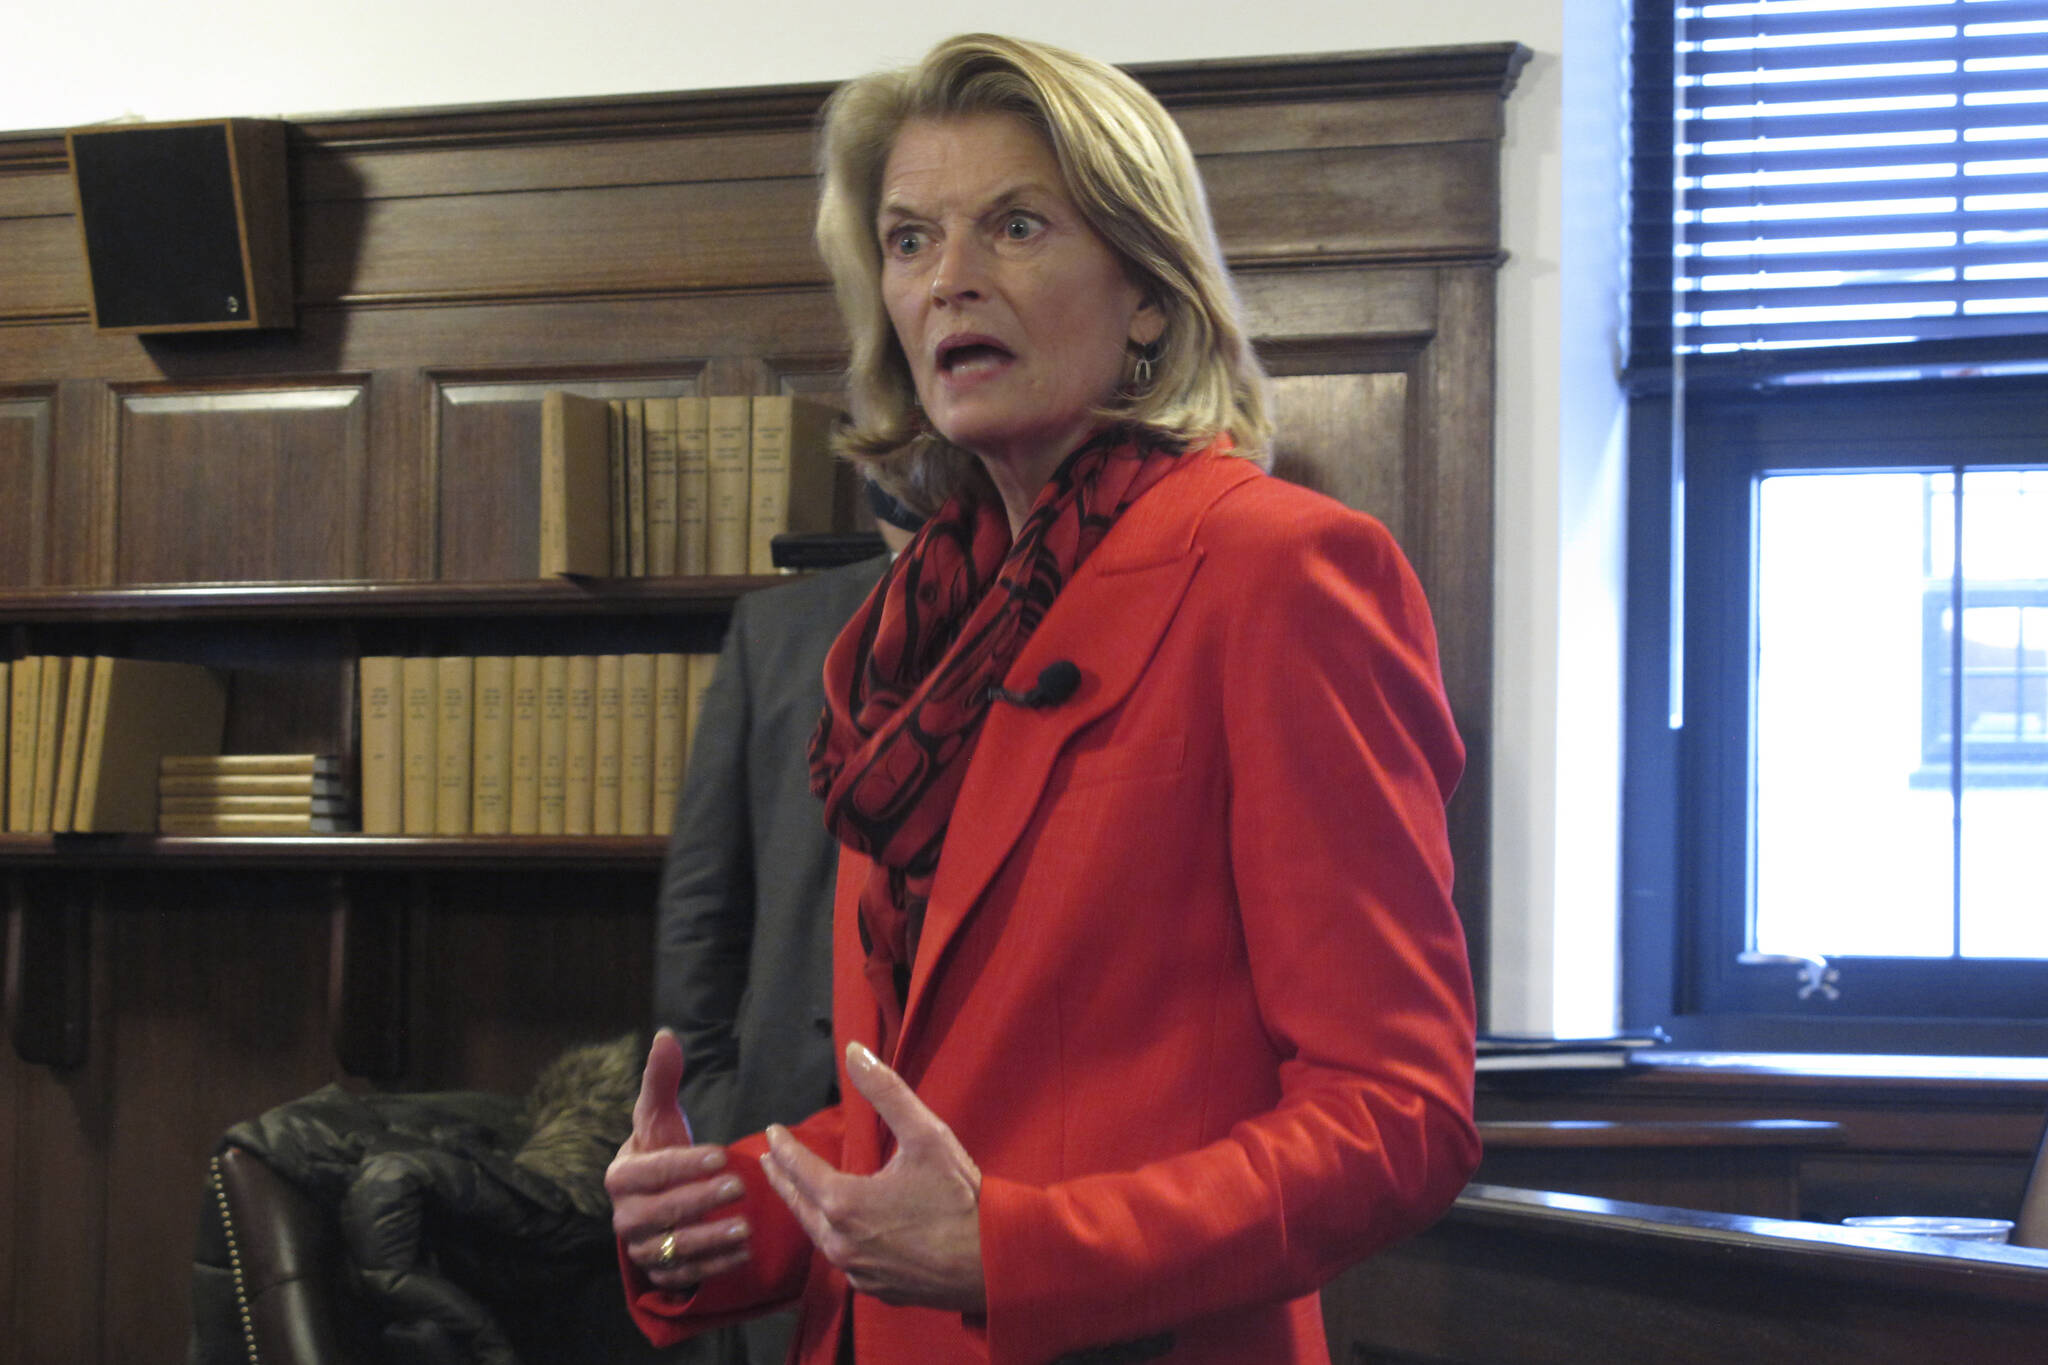 Sen. Lisa Murkowski, R-Alaska, speaks to reporters in the state Capitol on on Feb. 22, 2022, in Juneau, Alaska. President Joe Biden and Senate Democrats say they are hoping for a bipartisan vote to confirm Ketanji Brown Jackson to the Supreme Court. (AP Photo/Becky Bohrer, File)